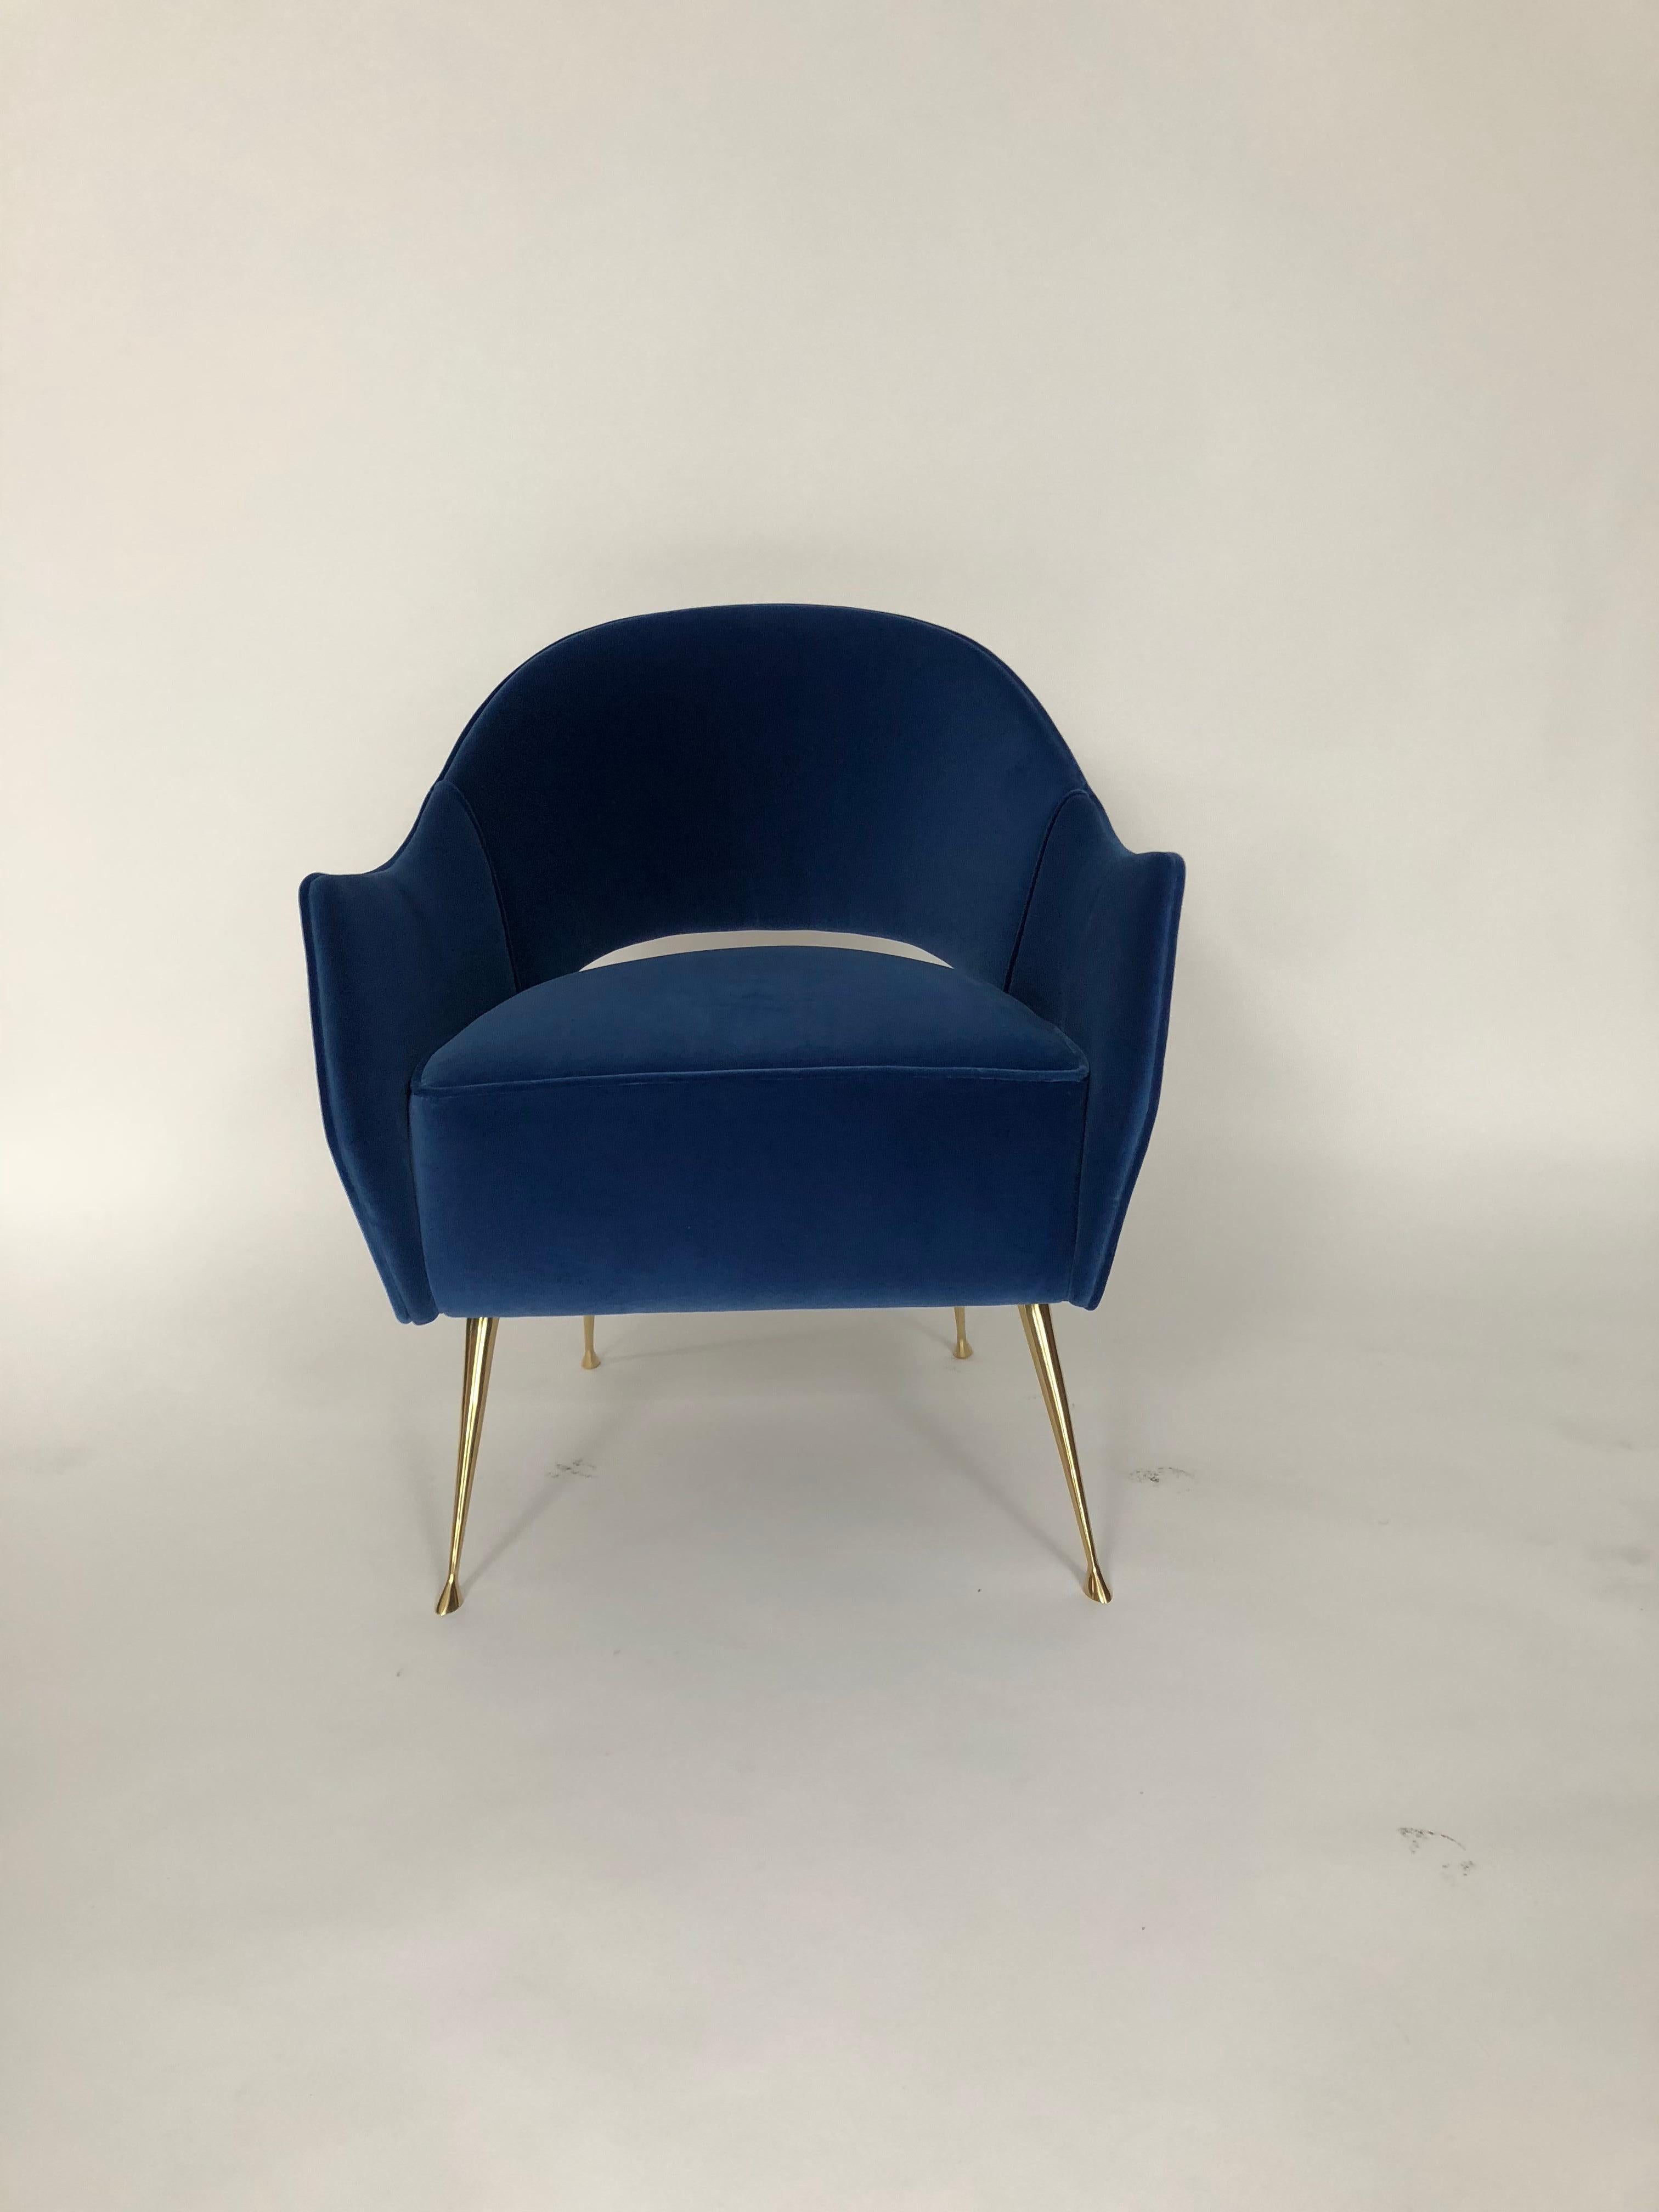 These elegant chairs have cast brass legs and a distinctive curved back. The chairs are very comfortable, perfect in size and are ideal as small-scale side chairs. The beauty of the tapered brass legs with their graceful feet are sure to add that